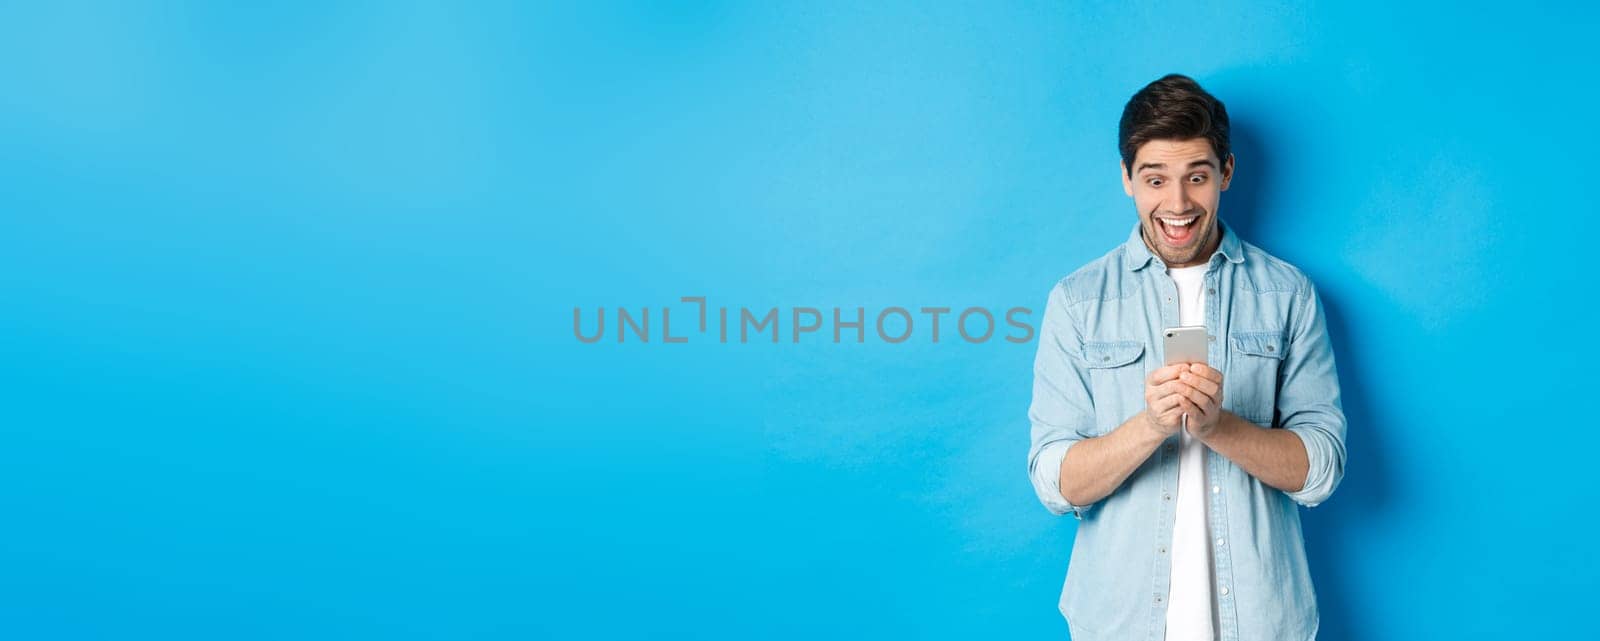 Image of excited man smiling while looking at mobile phone, shopping online on smartphone, standing against blue background.